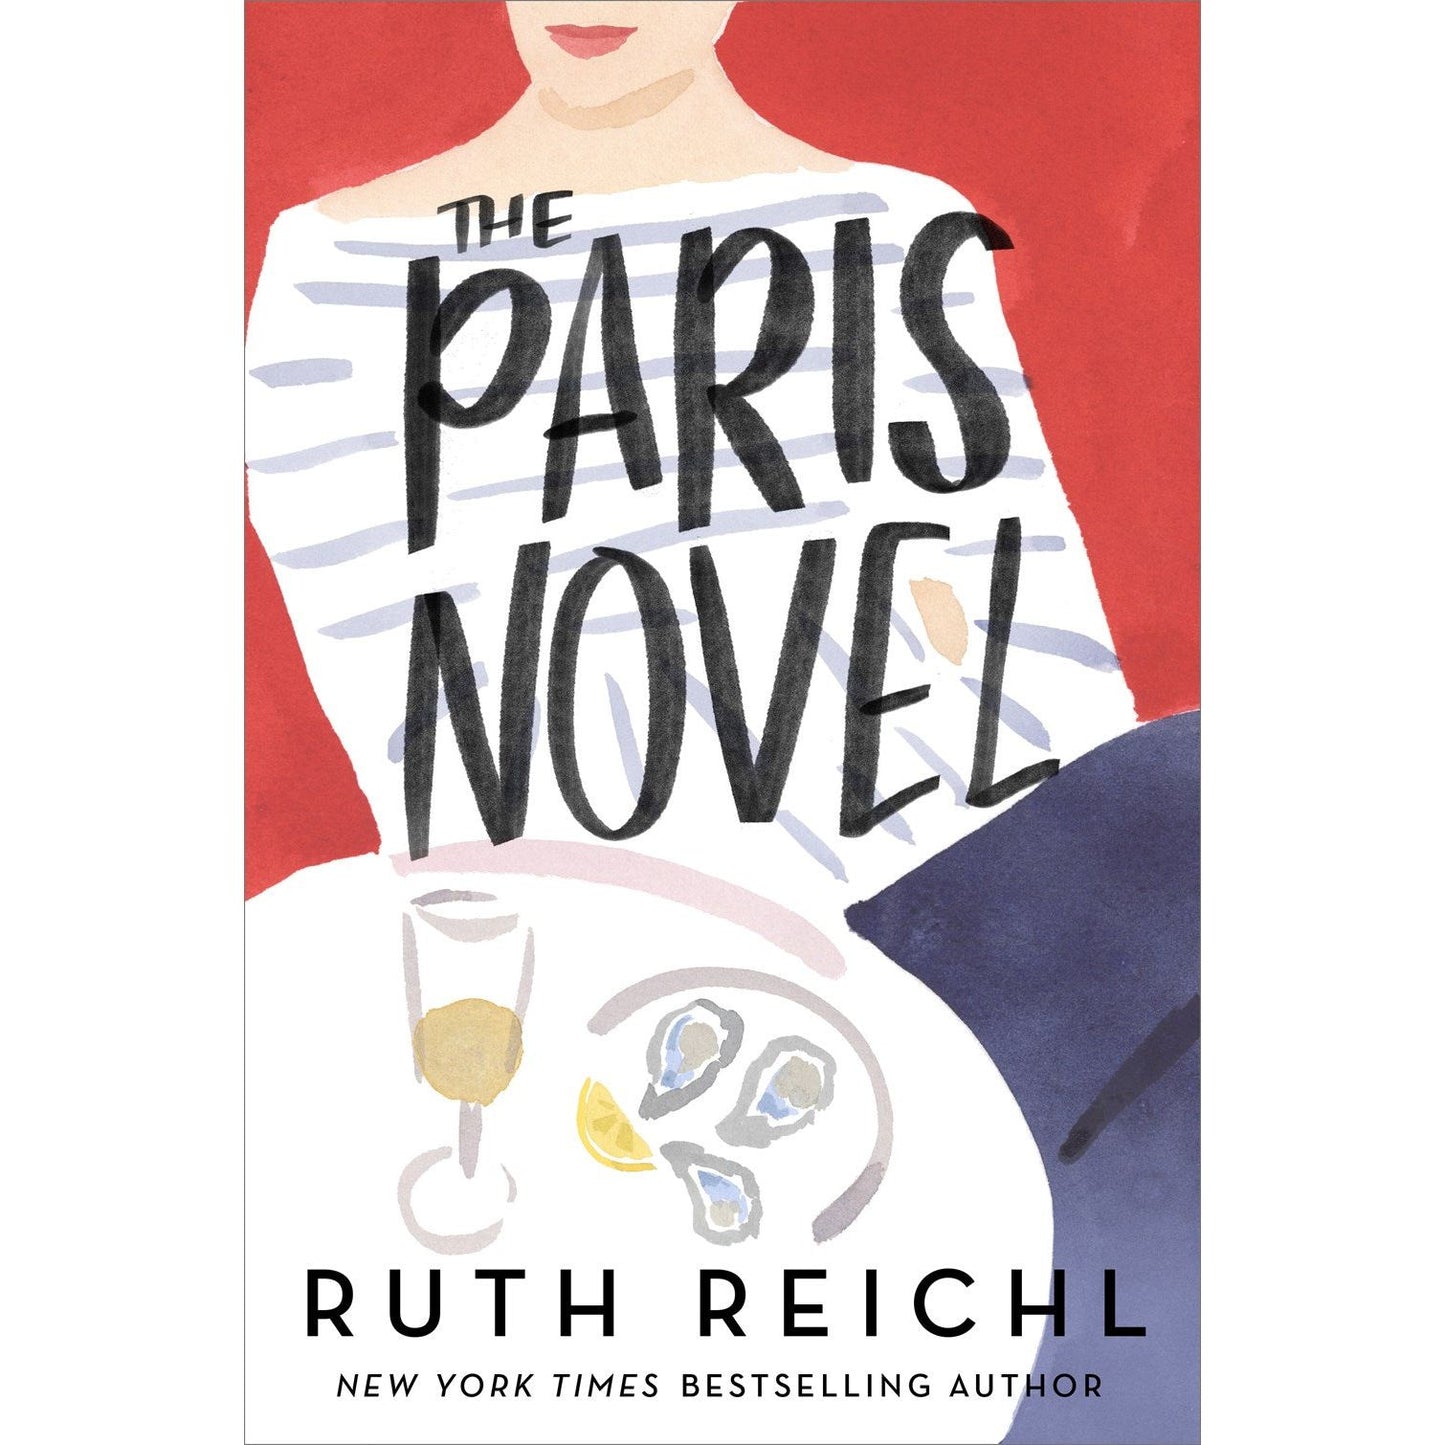 The Paris Novel (Ruth Reichl) with SIGNED BOOKPLATE